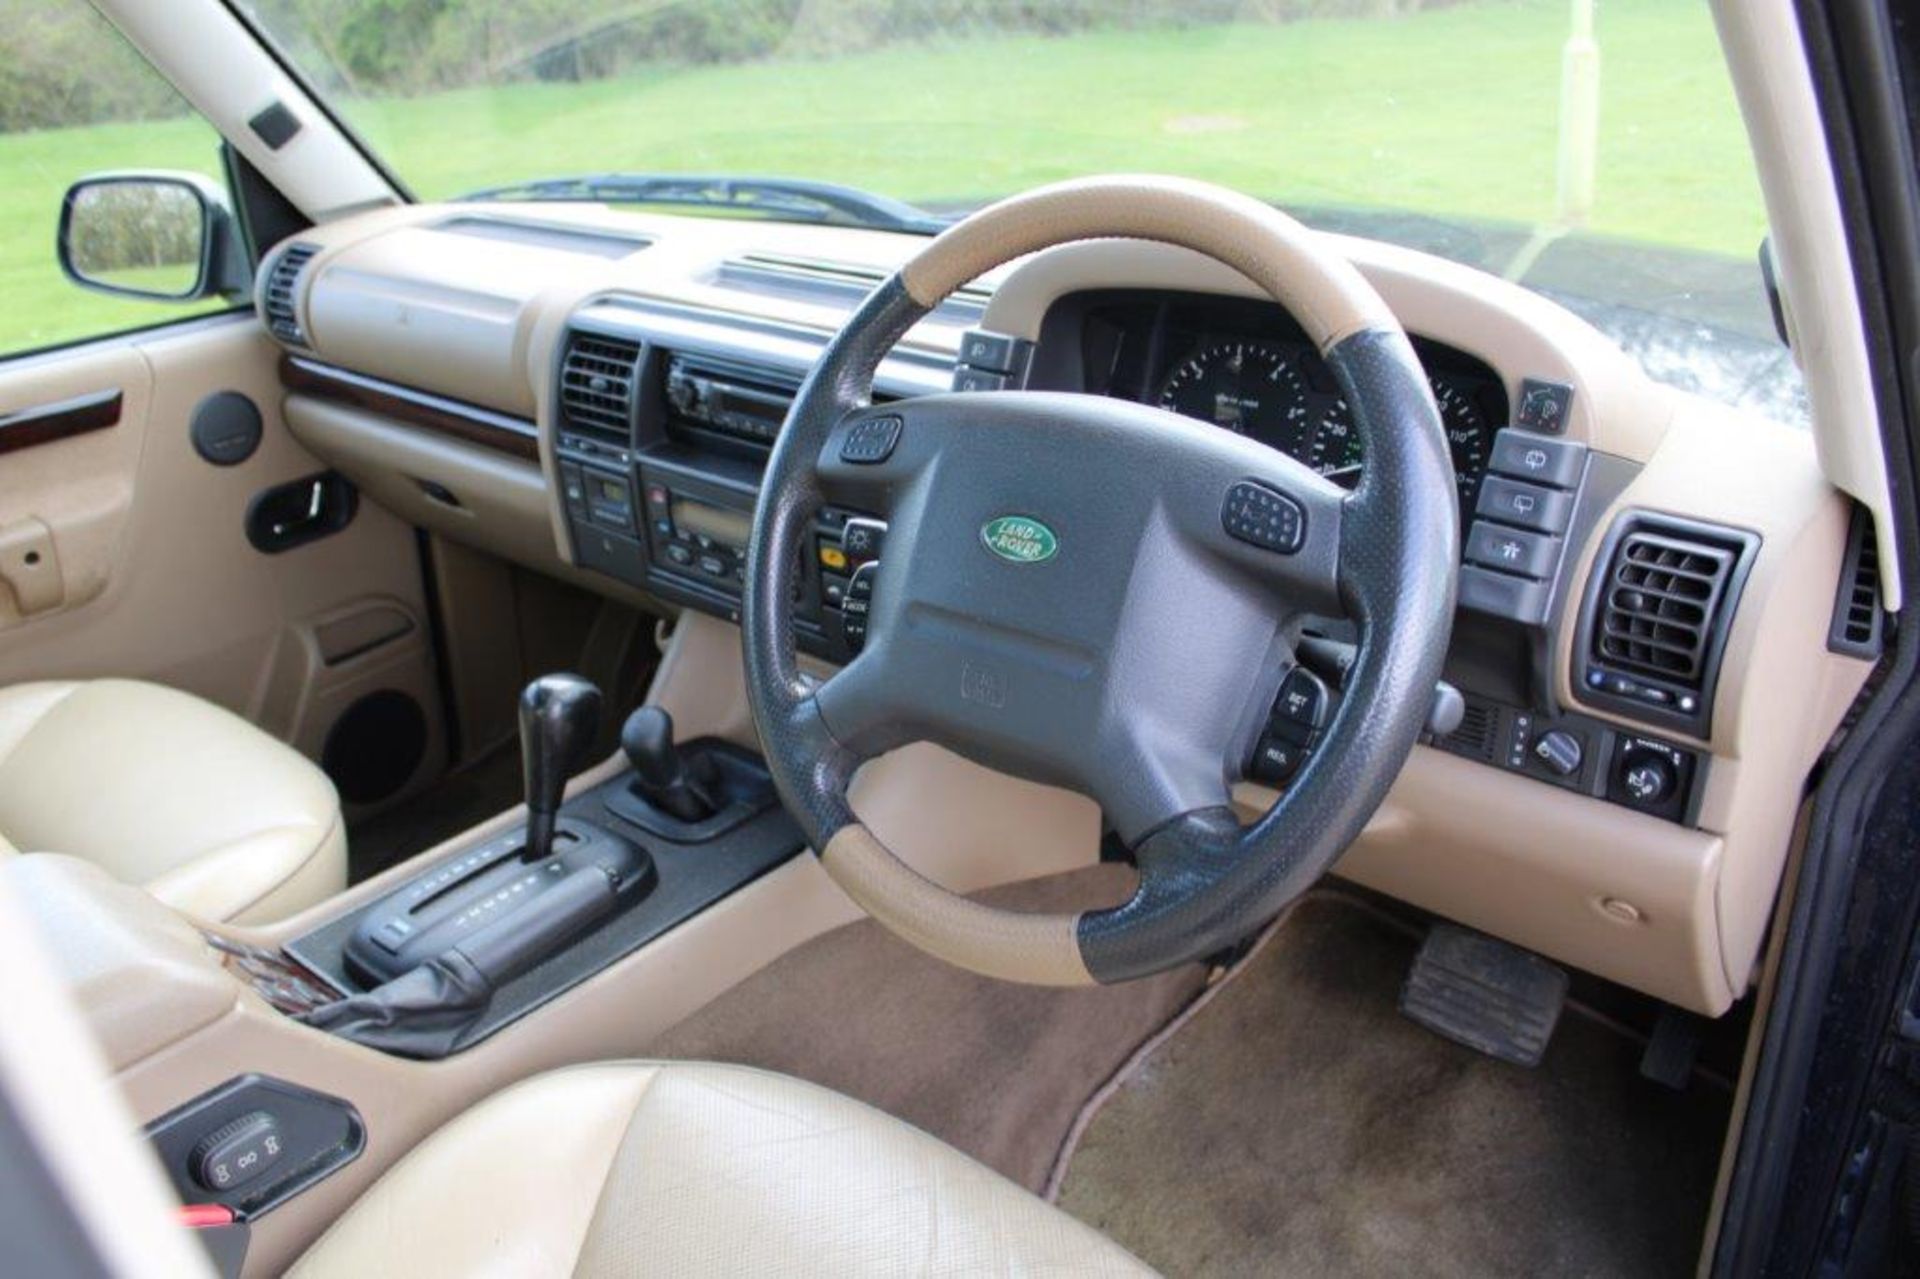 2000 Land Rover Discovery II V8 ES Auto - Image 11 of 14